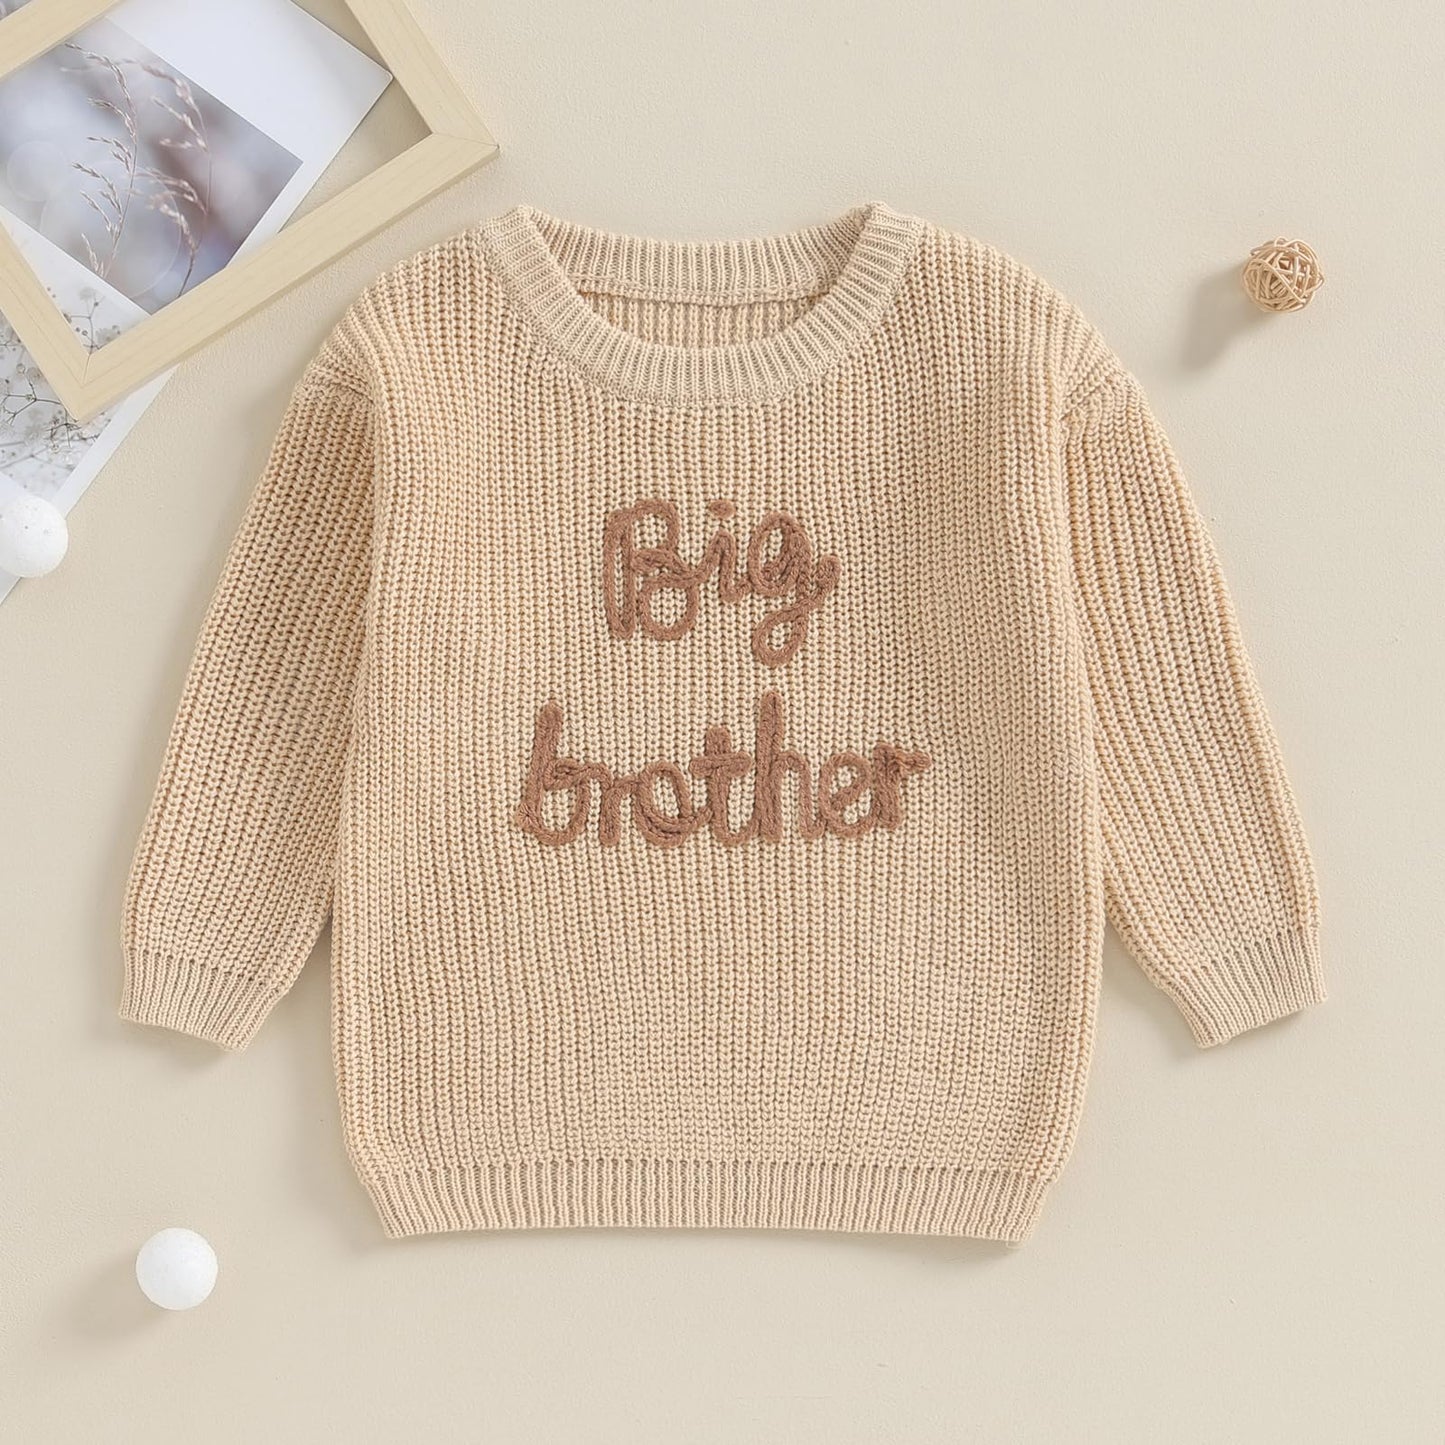 Dcohmch Big Sister Little Brother Matching Outfits Long Sleeve Sweatshirt Romper Shirt Baby Boy Girl Fall Clothes